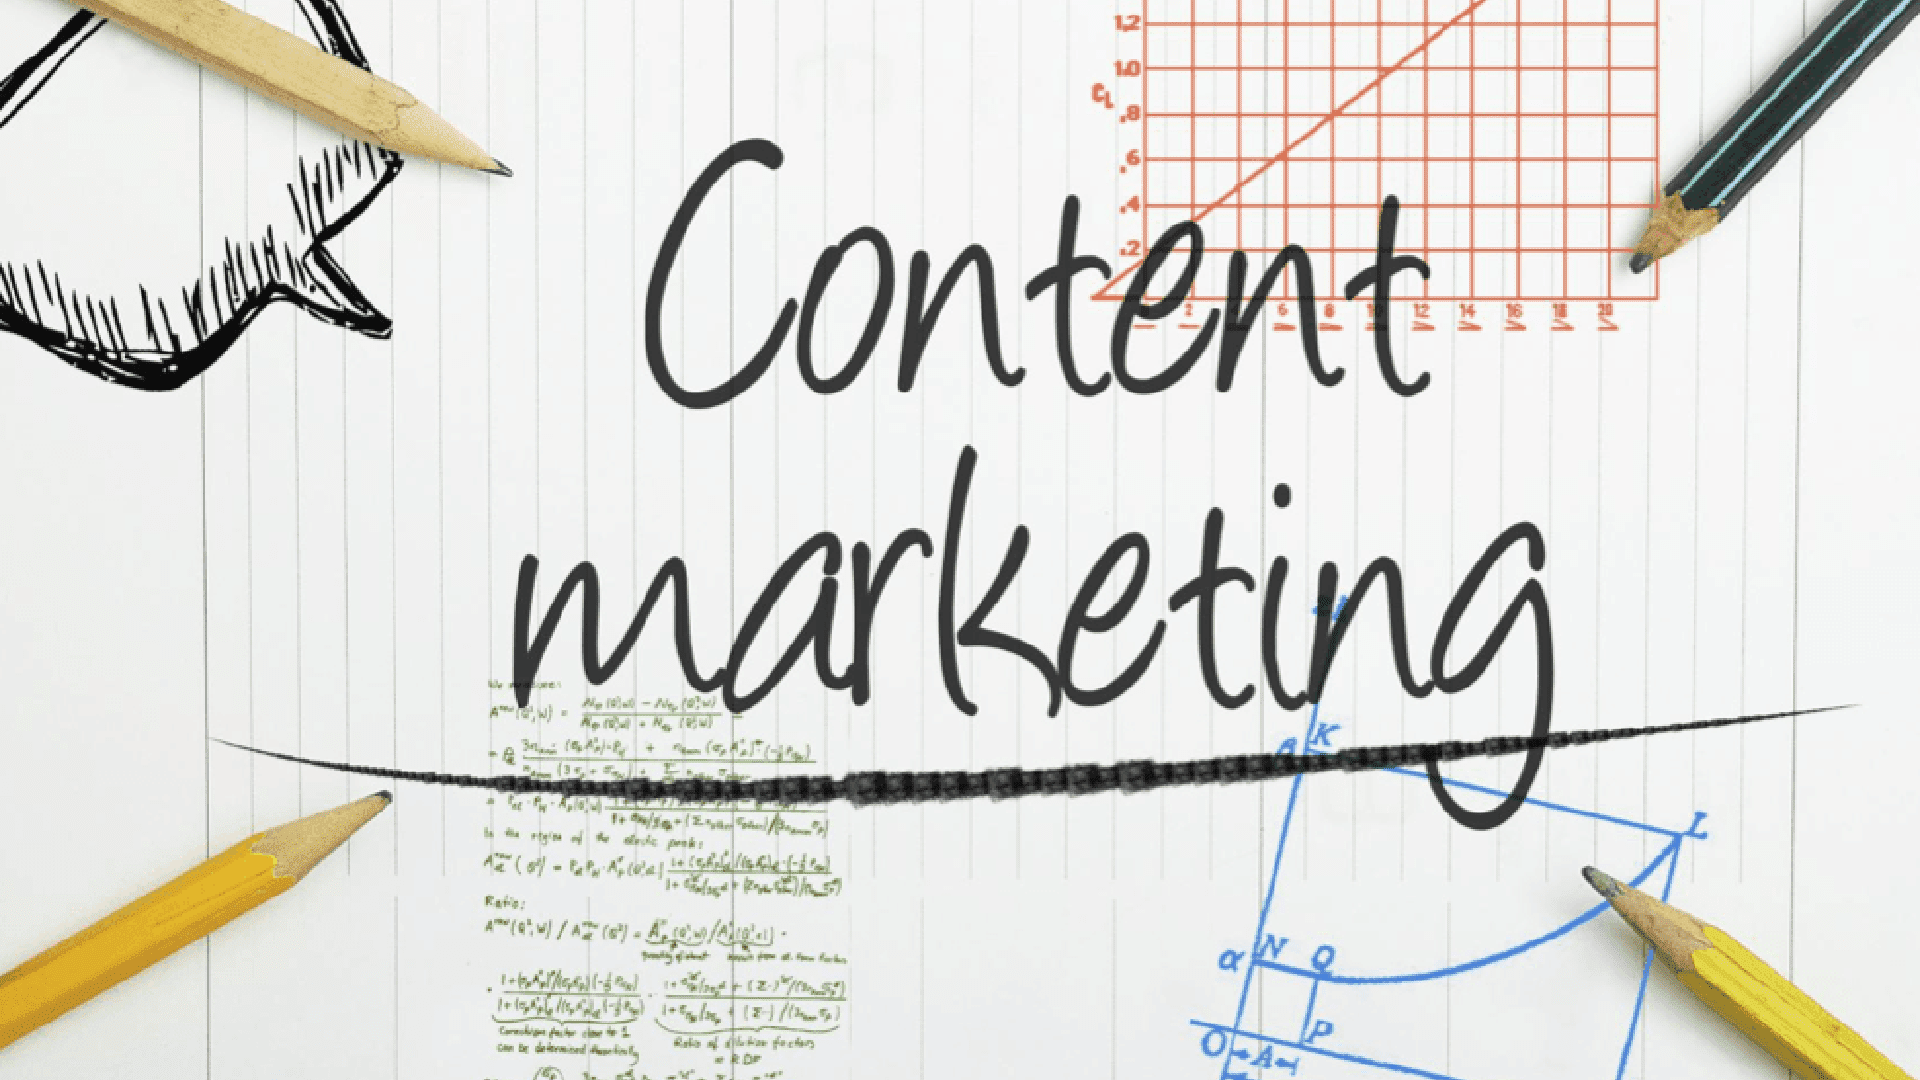 content marketing as a business strategy for growing your business.